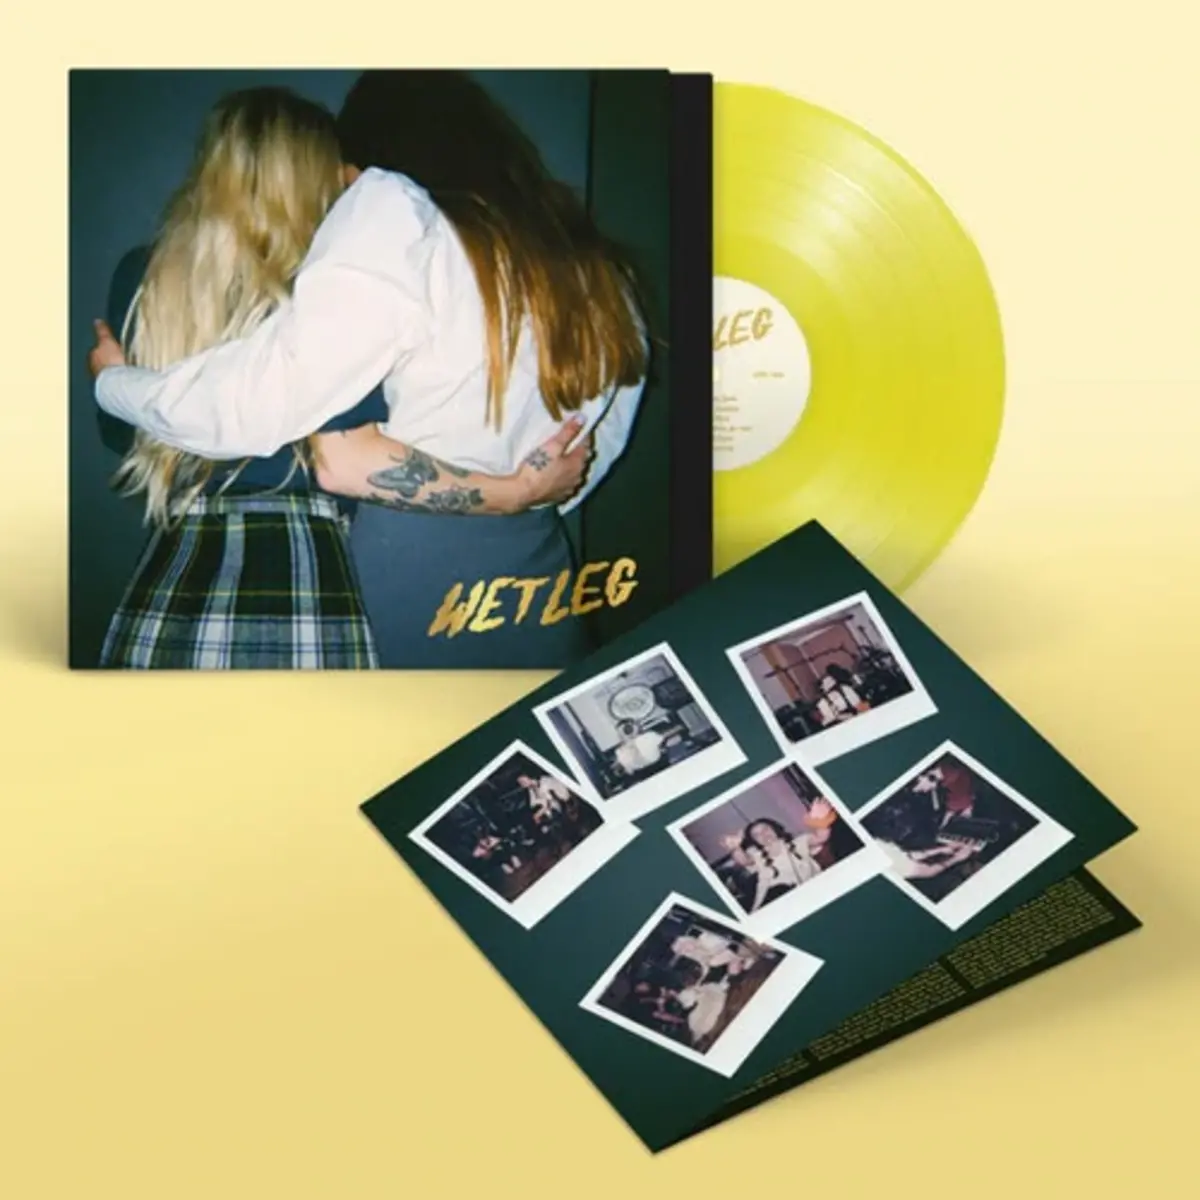 Wet Leg's debut album is also available on Yellow Vinyl.